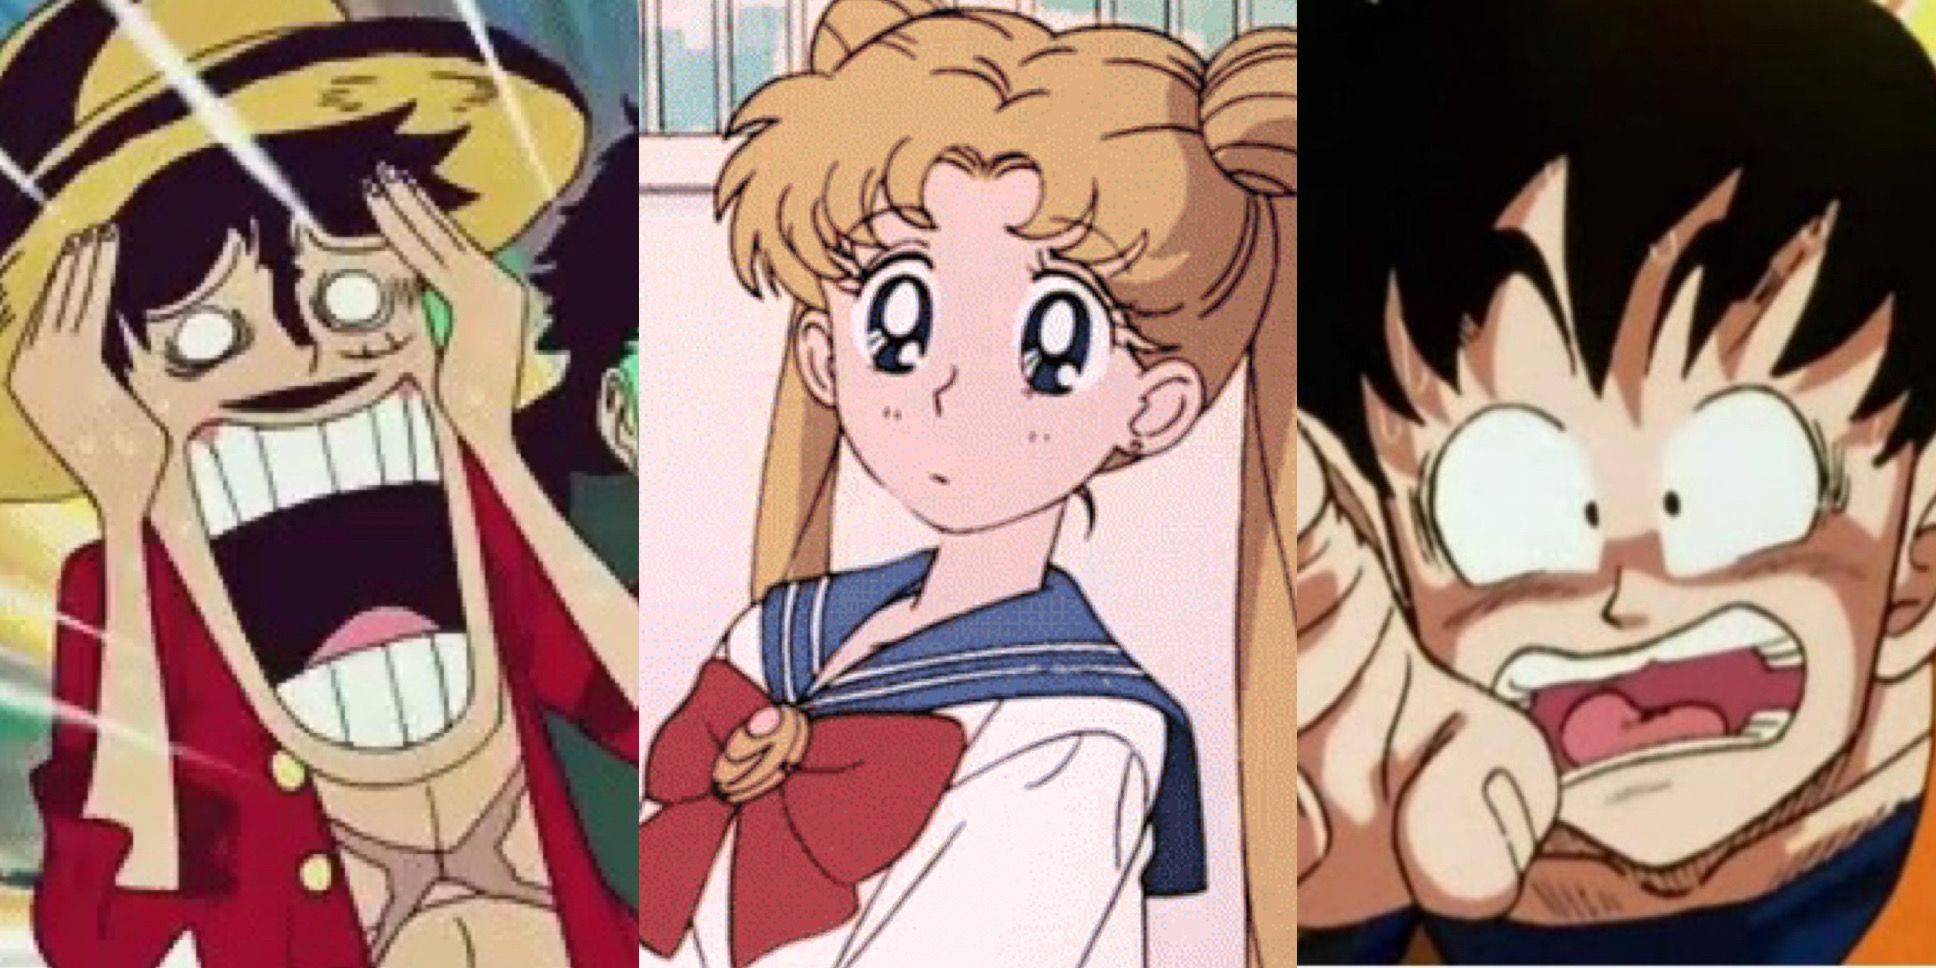 Luffy from one piece, Usagi from sailor moon and Goku from dragon ball looking shocked